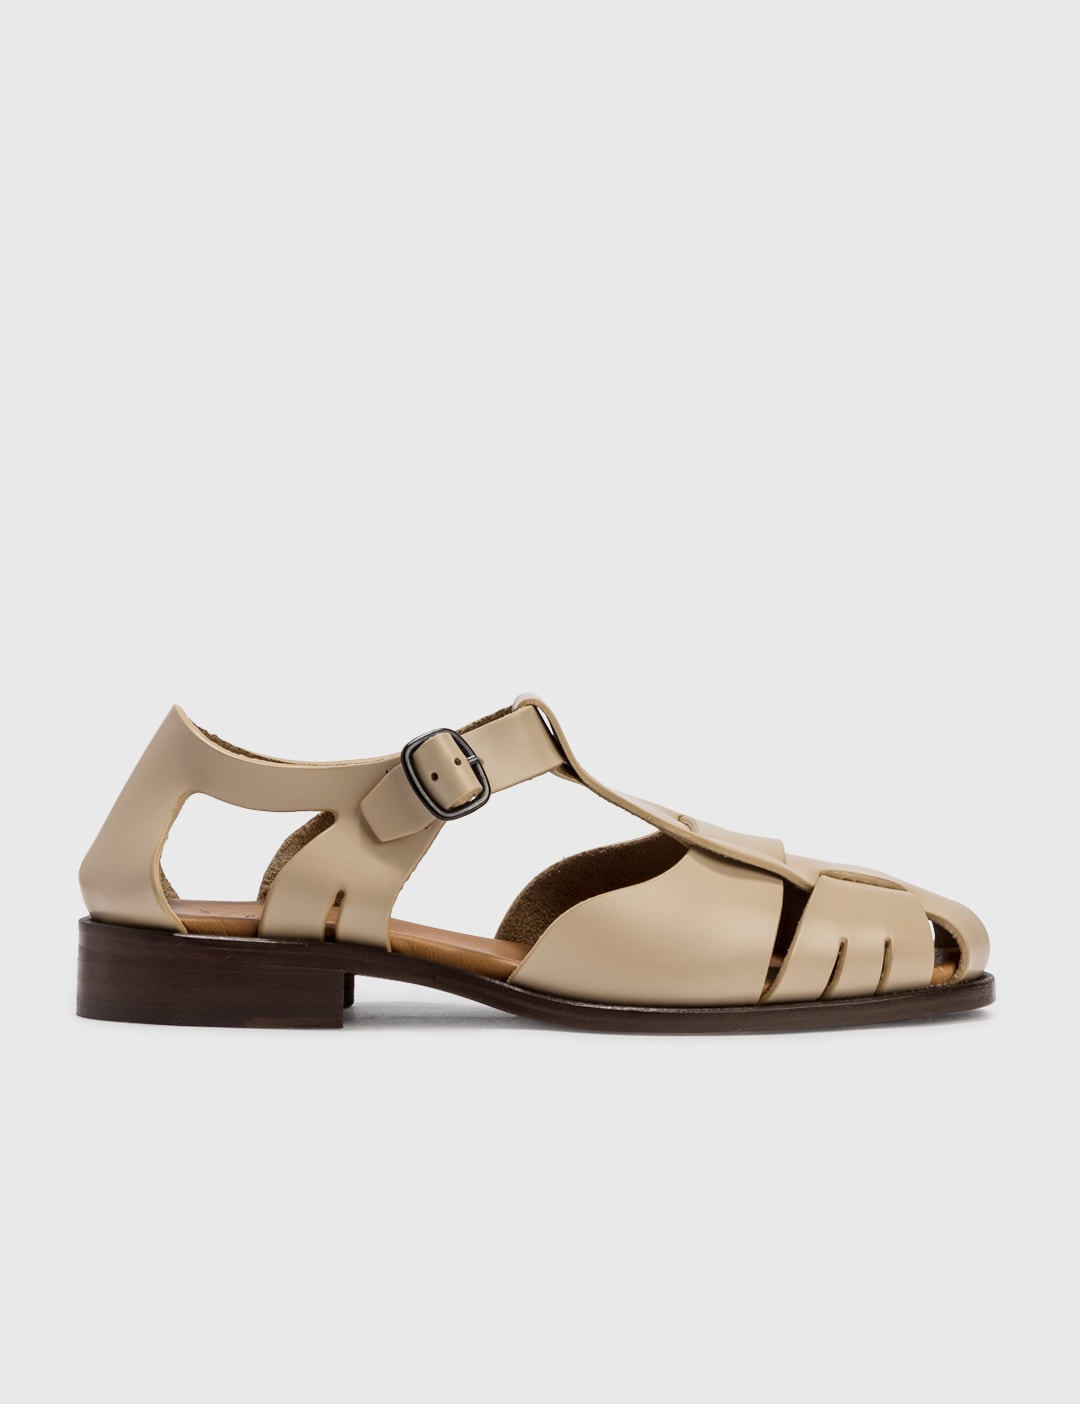 Hereu - Pesca Sandals | HBX - Globally Curated Fashion and Lifestyle by ...